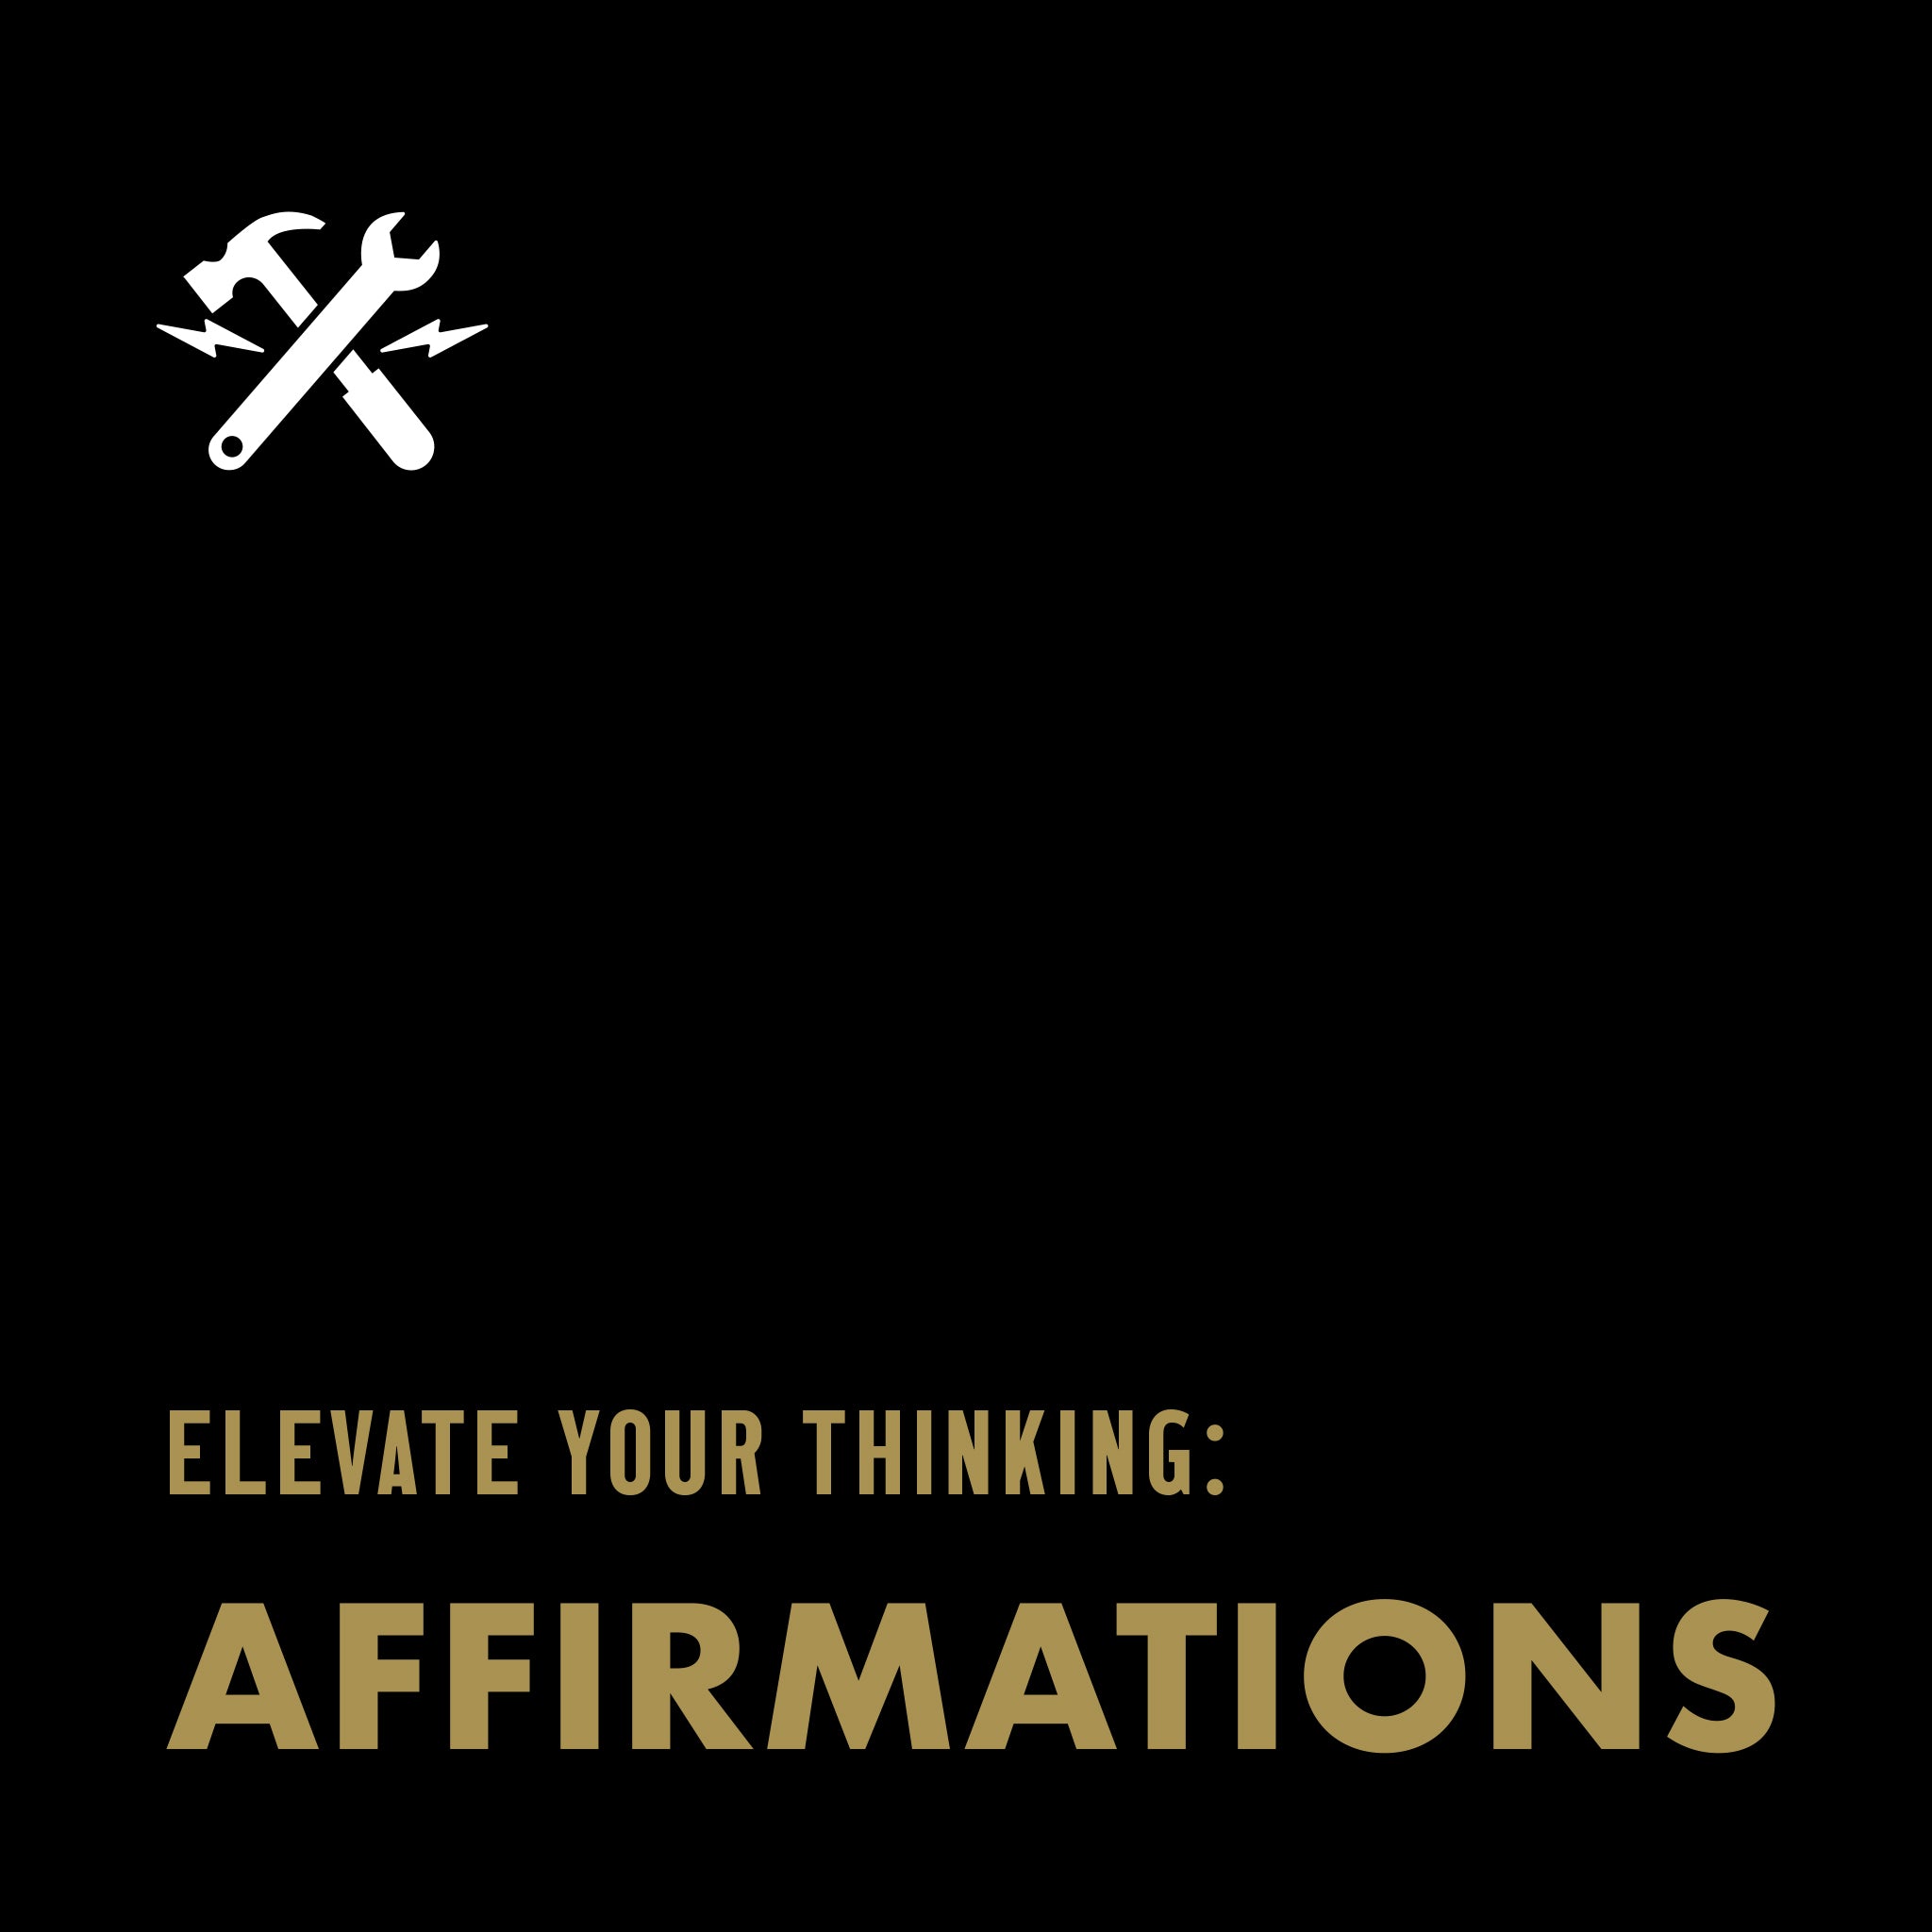 DOWNLOADABLE TOOL: Affirmations